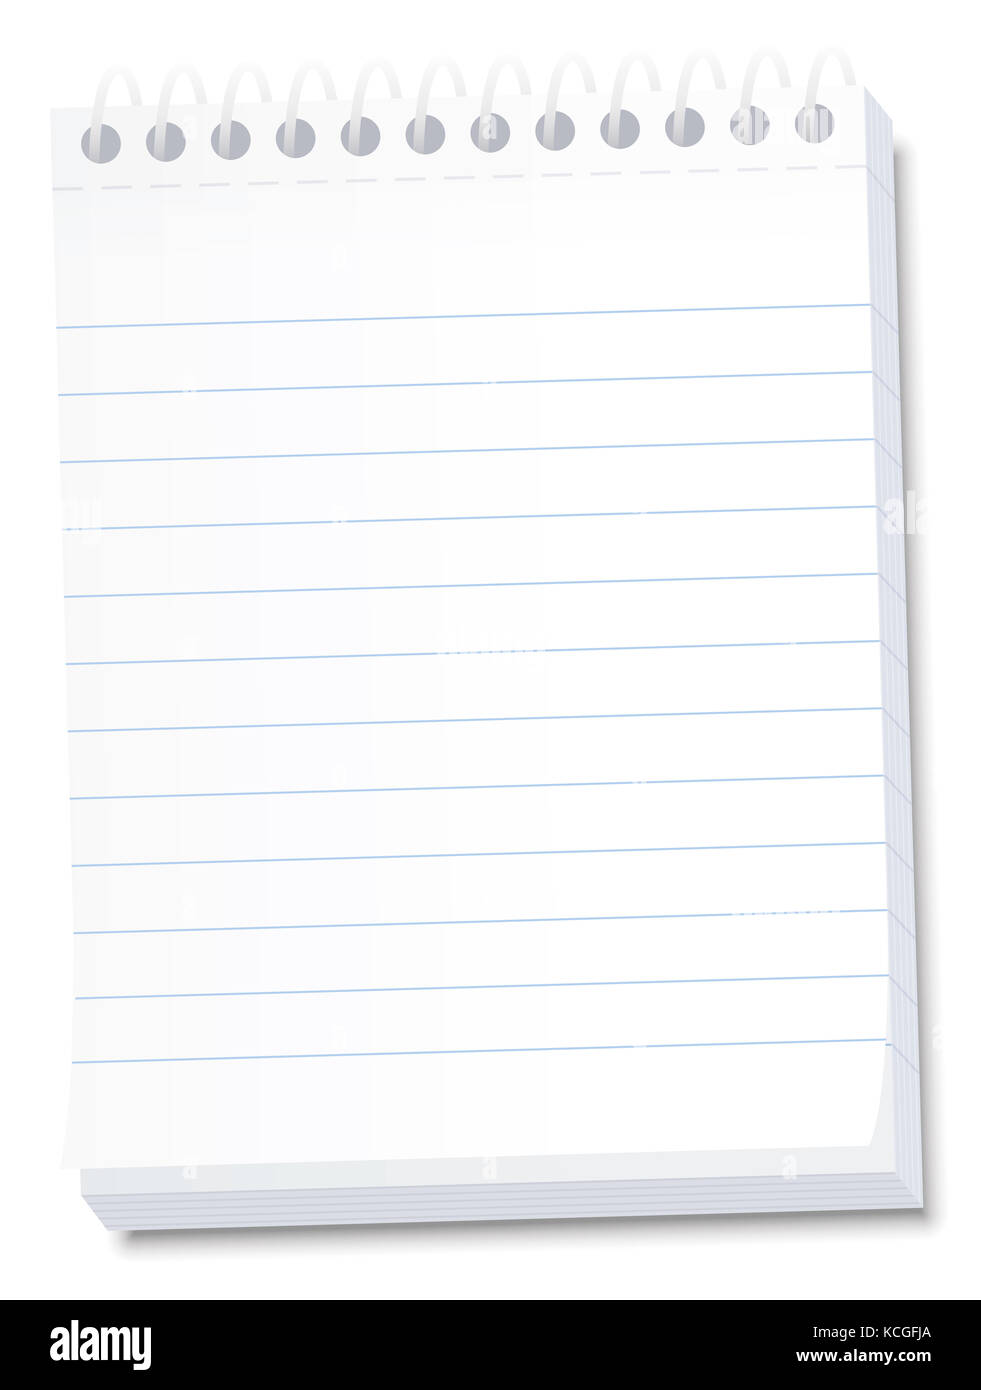 Notepad for memos, messages, notes, lists, dates, deadlines, reminders - lined blank high size tear off paper notebook with spiral binding. Stock Photo